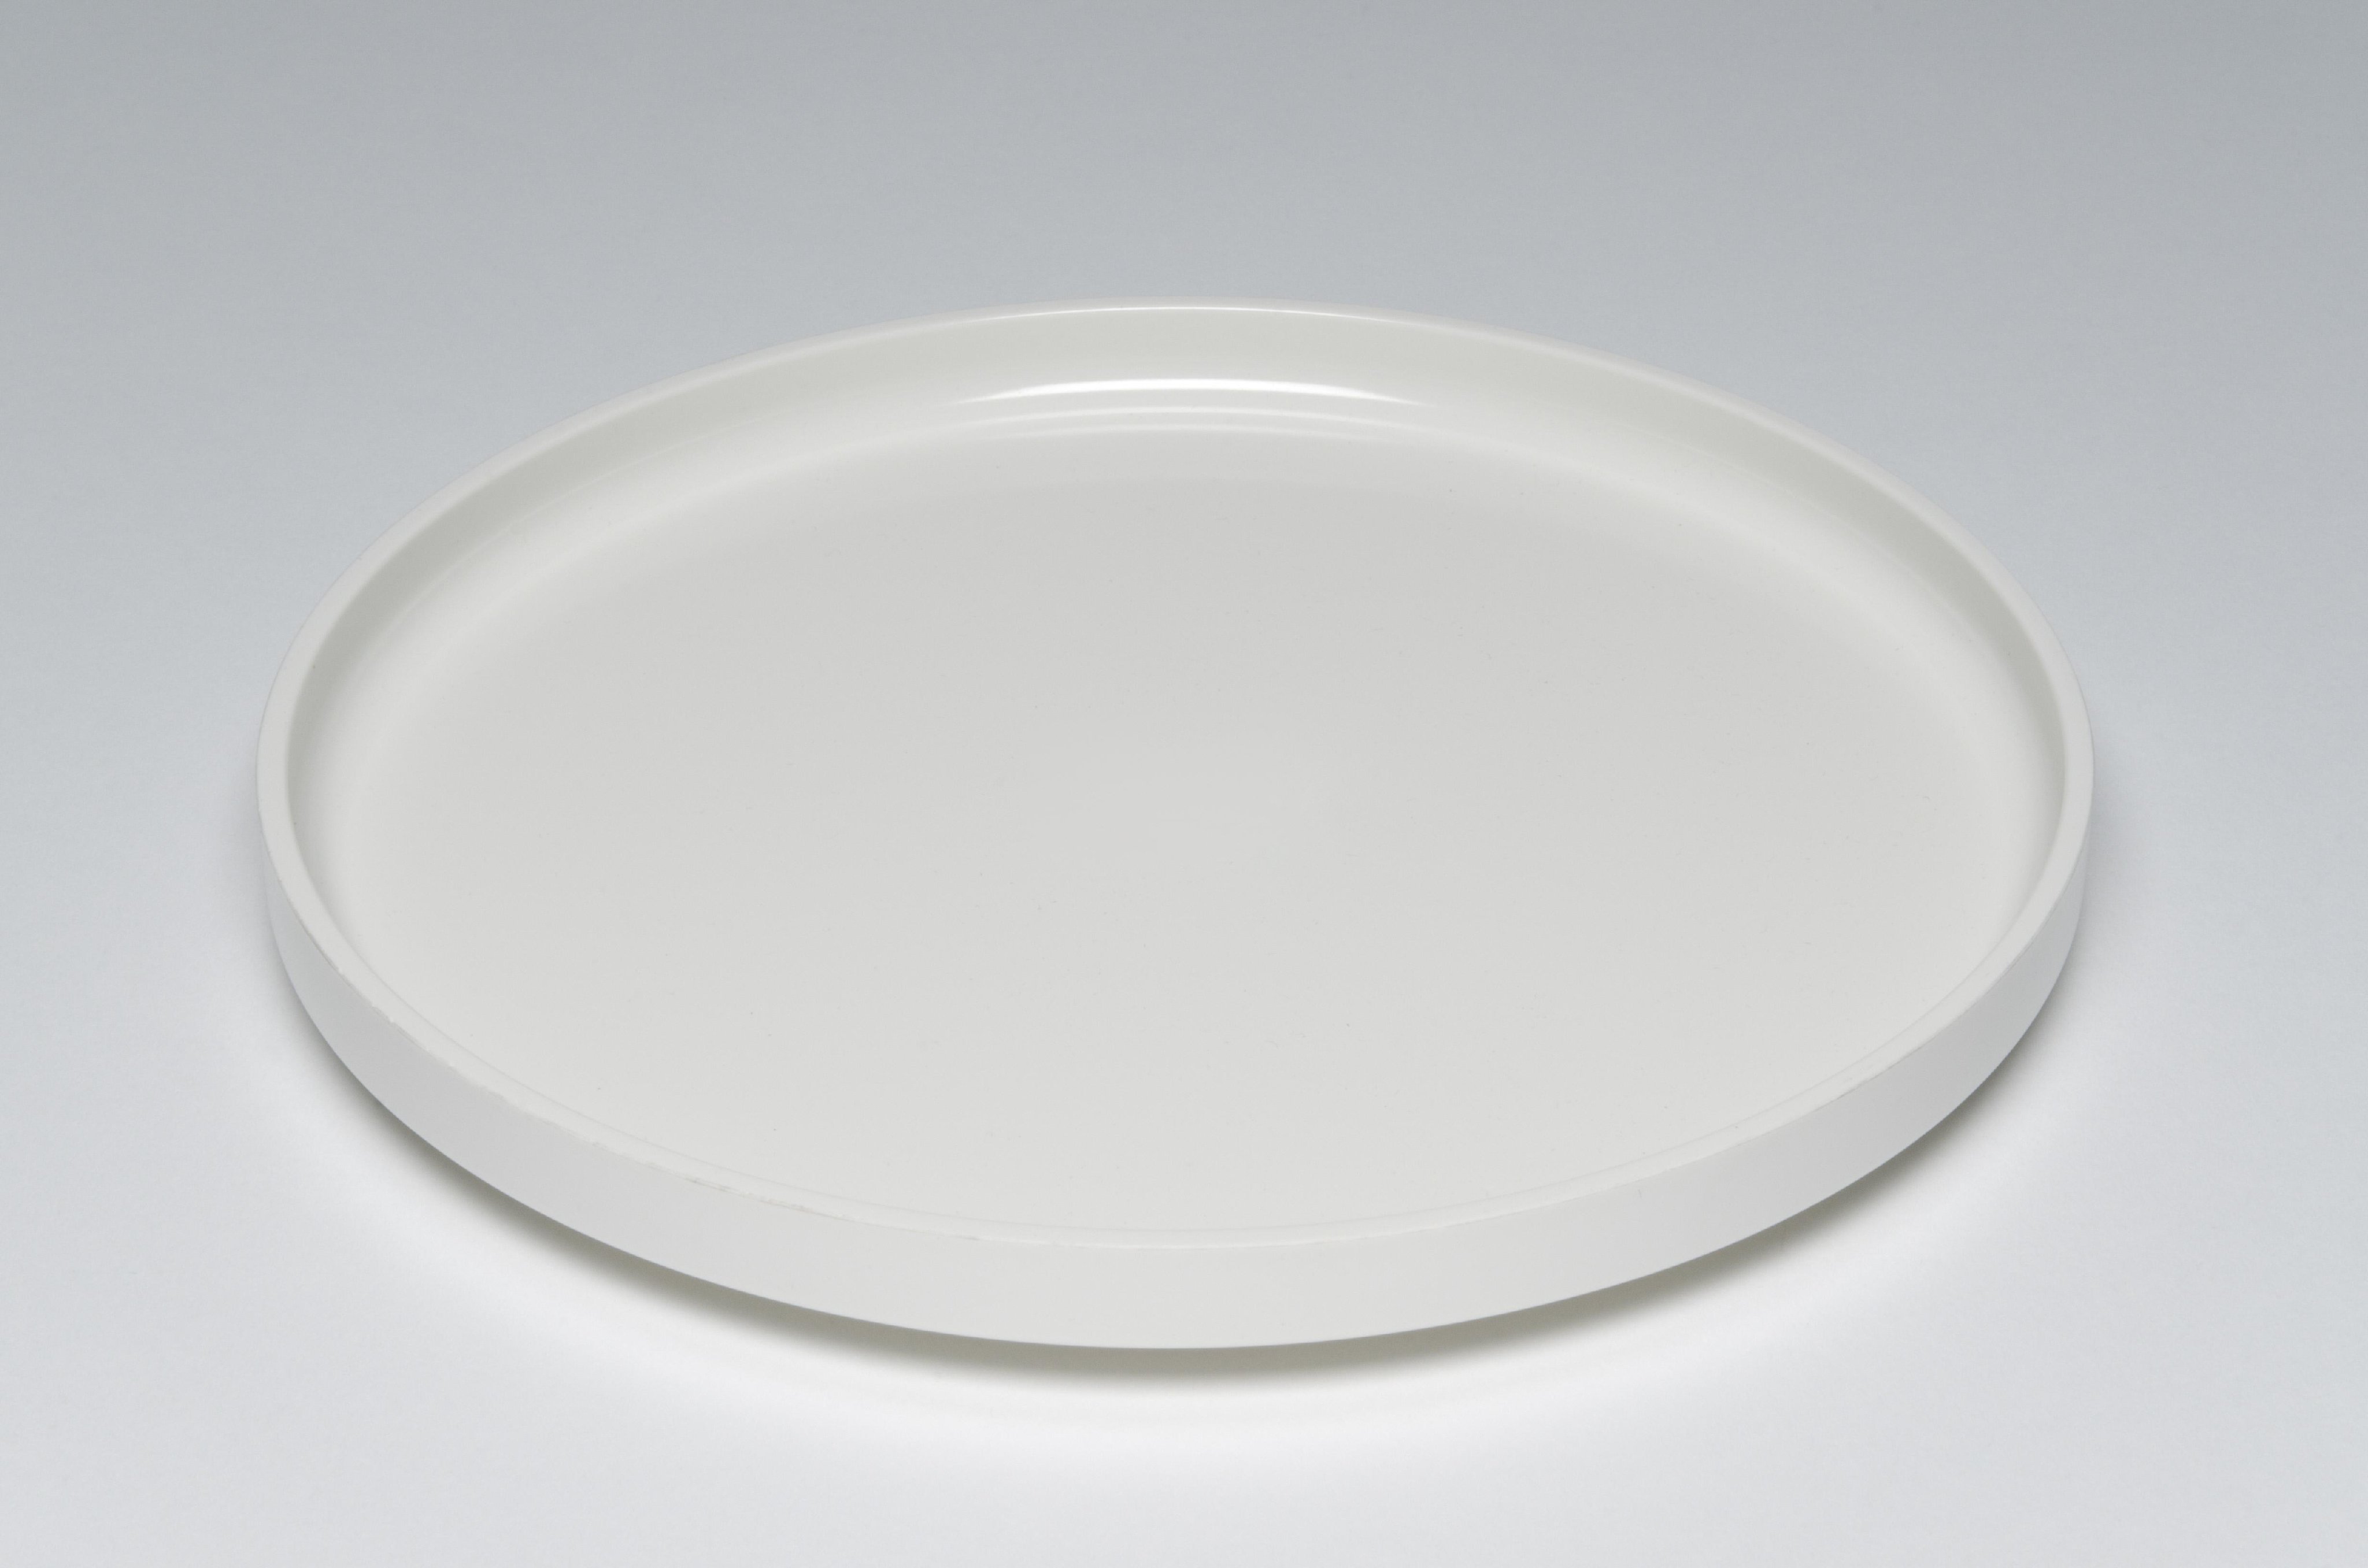 Salad Plate. Designed by Lella Vignelli and Massimo Vignelli. 1964. Made by Heller Designs, Inc., New York, (1971–present)